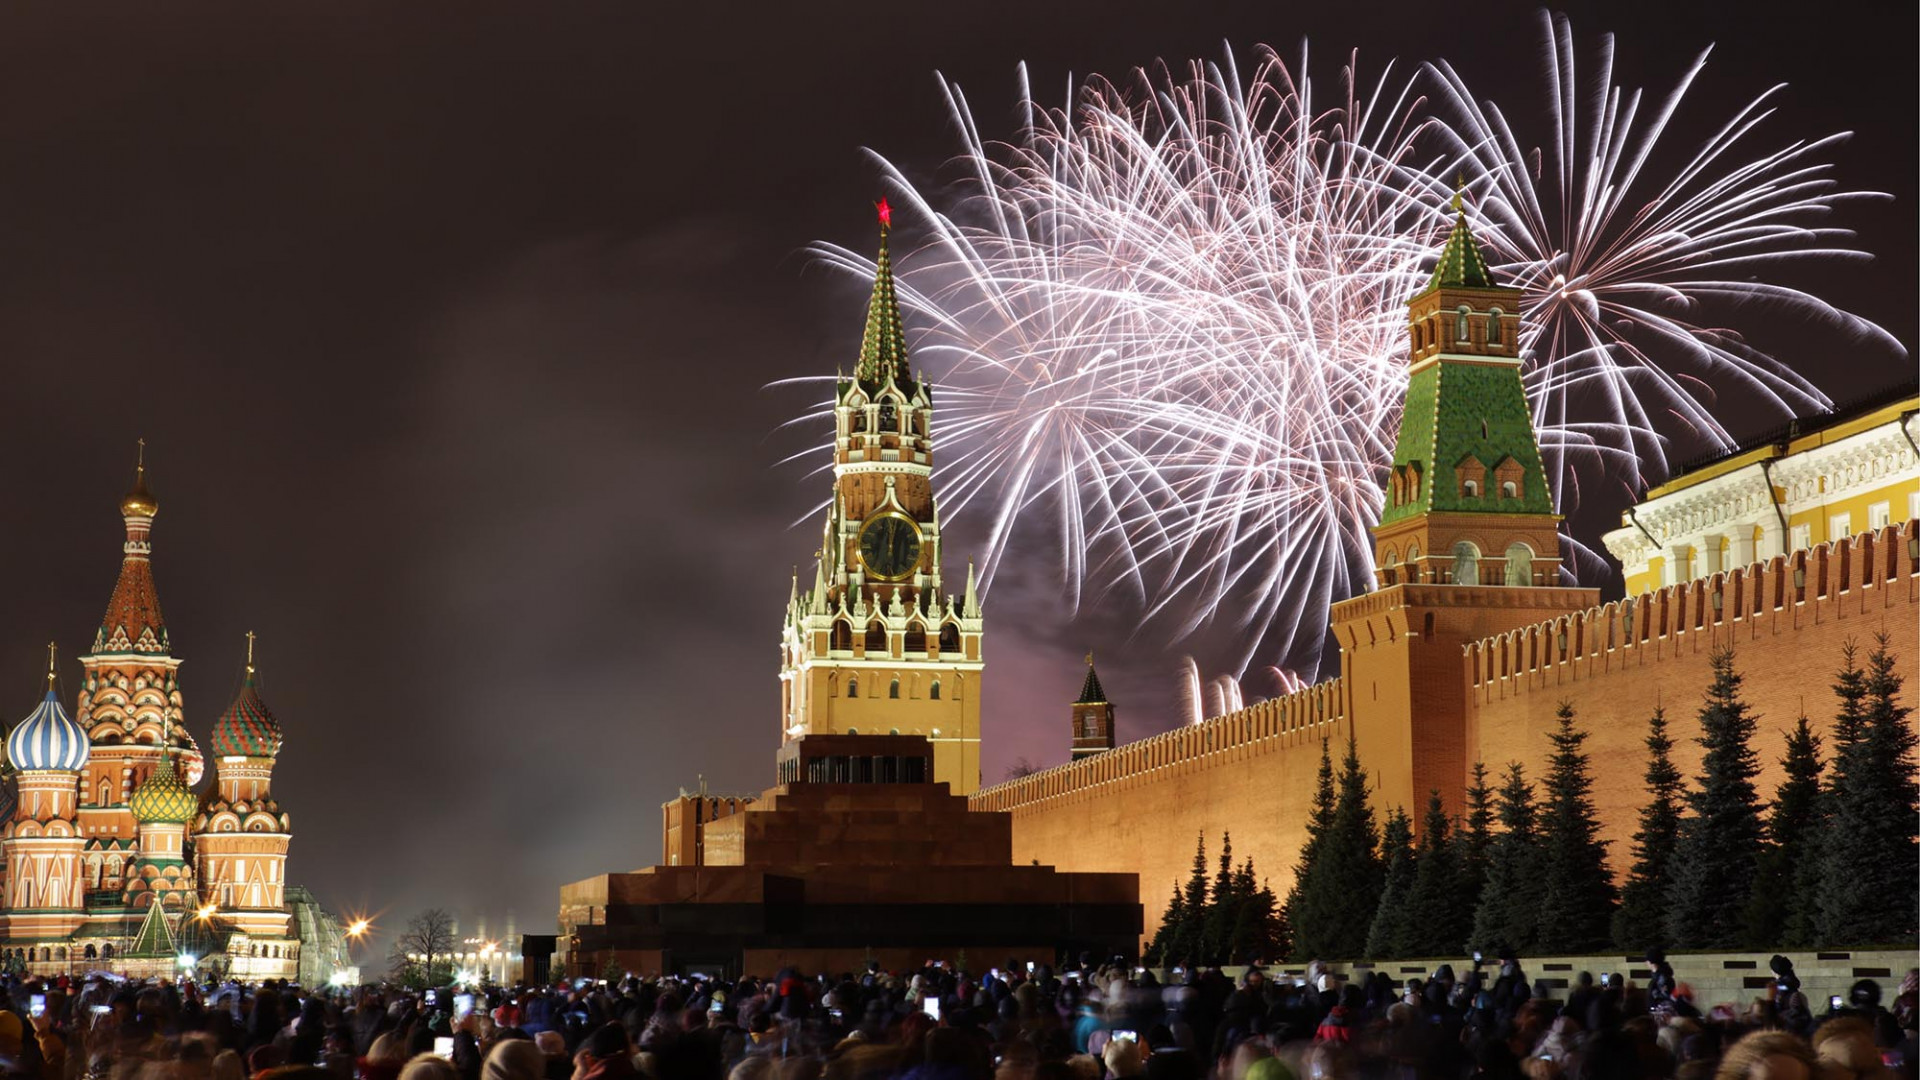 Russia Welcomes 2020 With Fireworks and Festivities - The Moscow Times